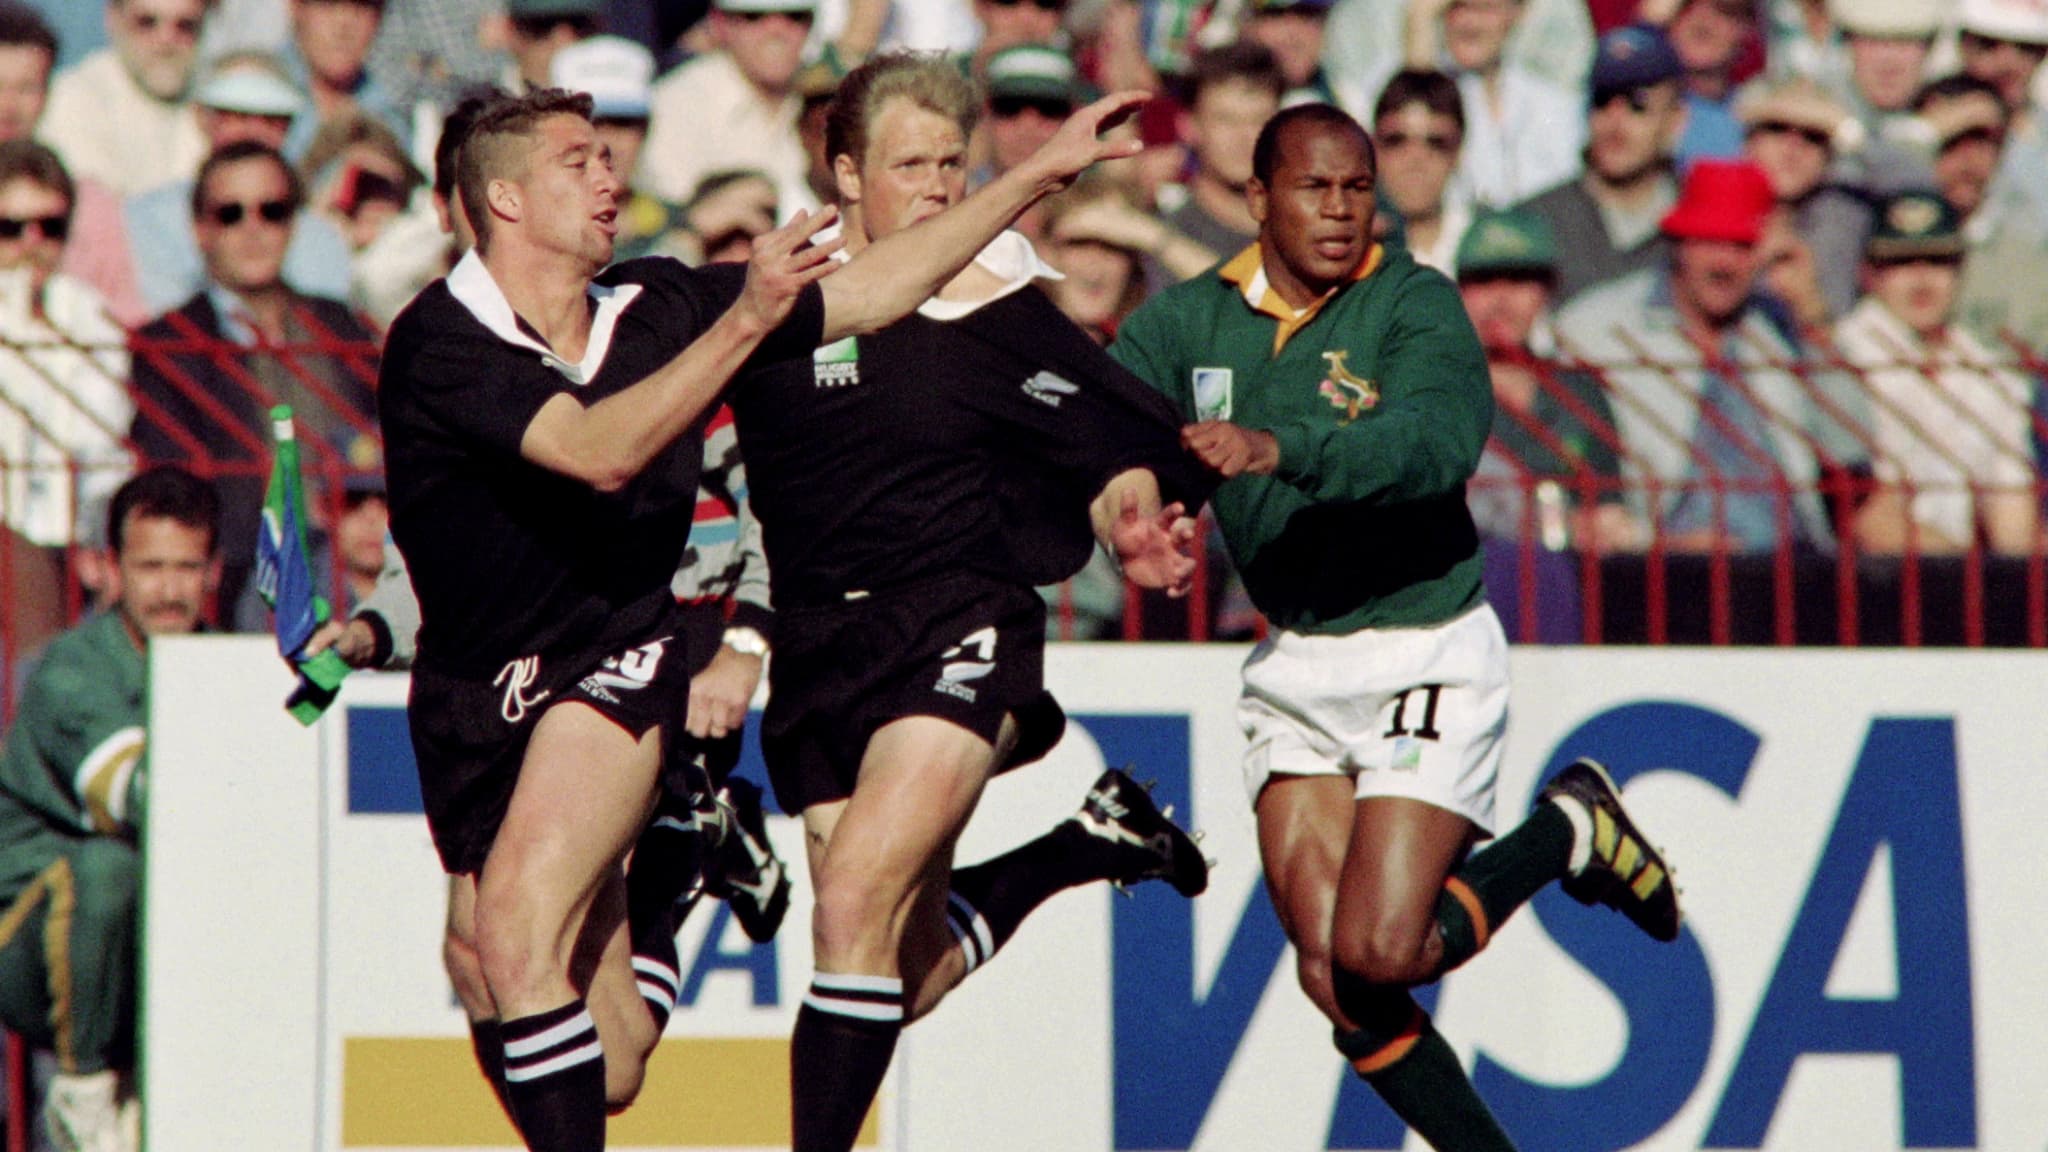 Philippe Saint-Andre doubts about the final between the Springboks and All Blacks in 1995